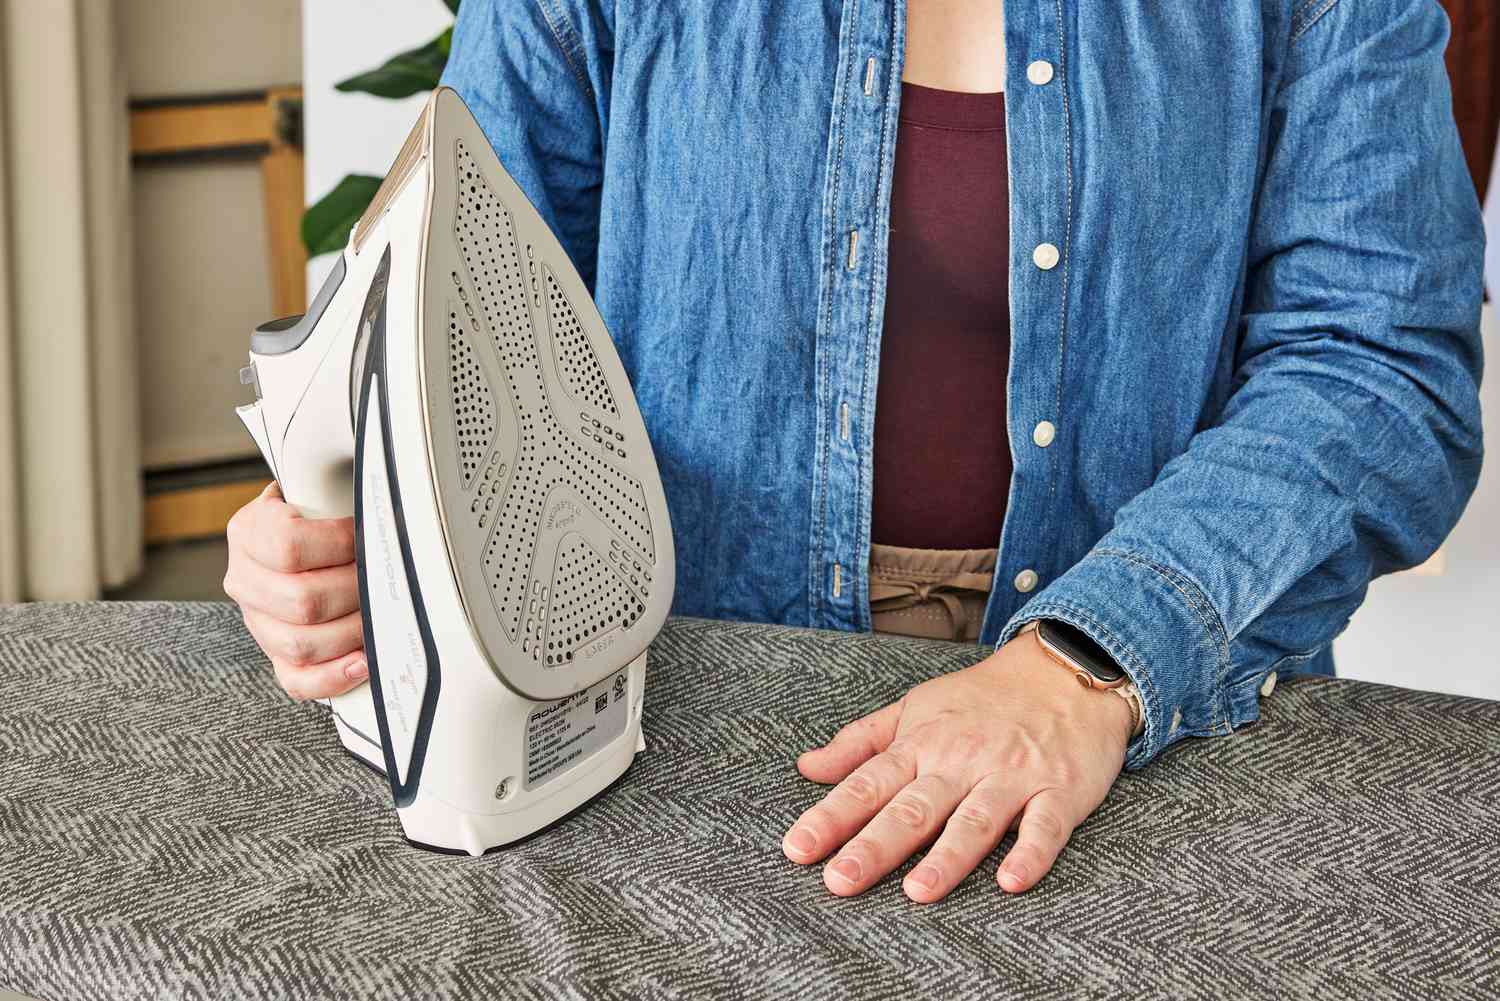 A person holding an iron with one hand and pressing on the Bartnelli Heavy Duty Ironing Board with the other